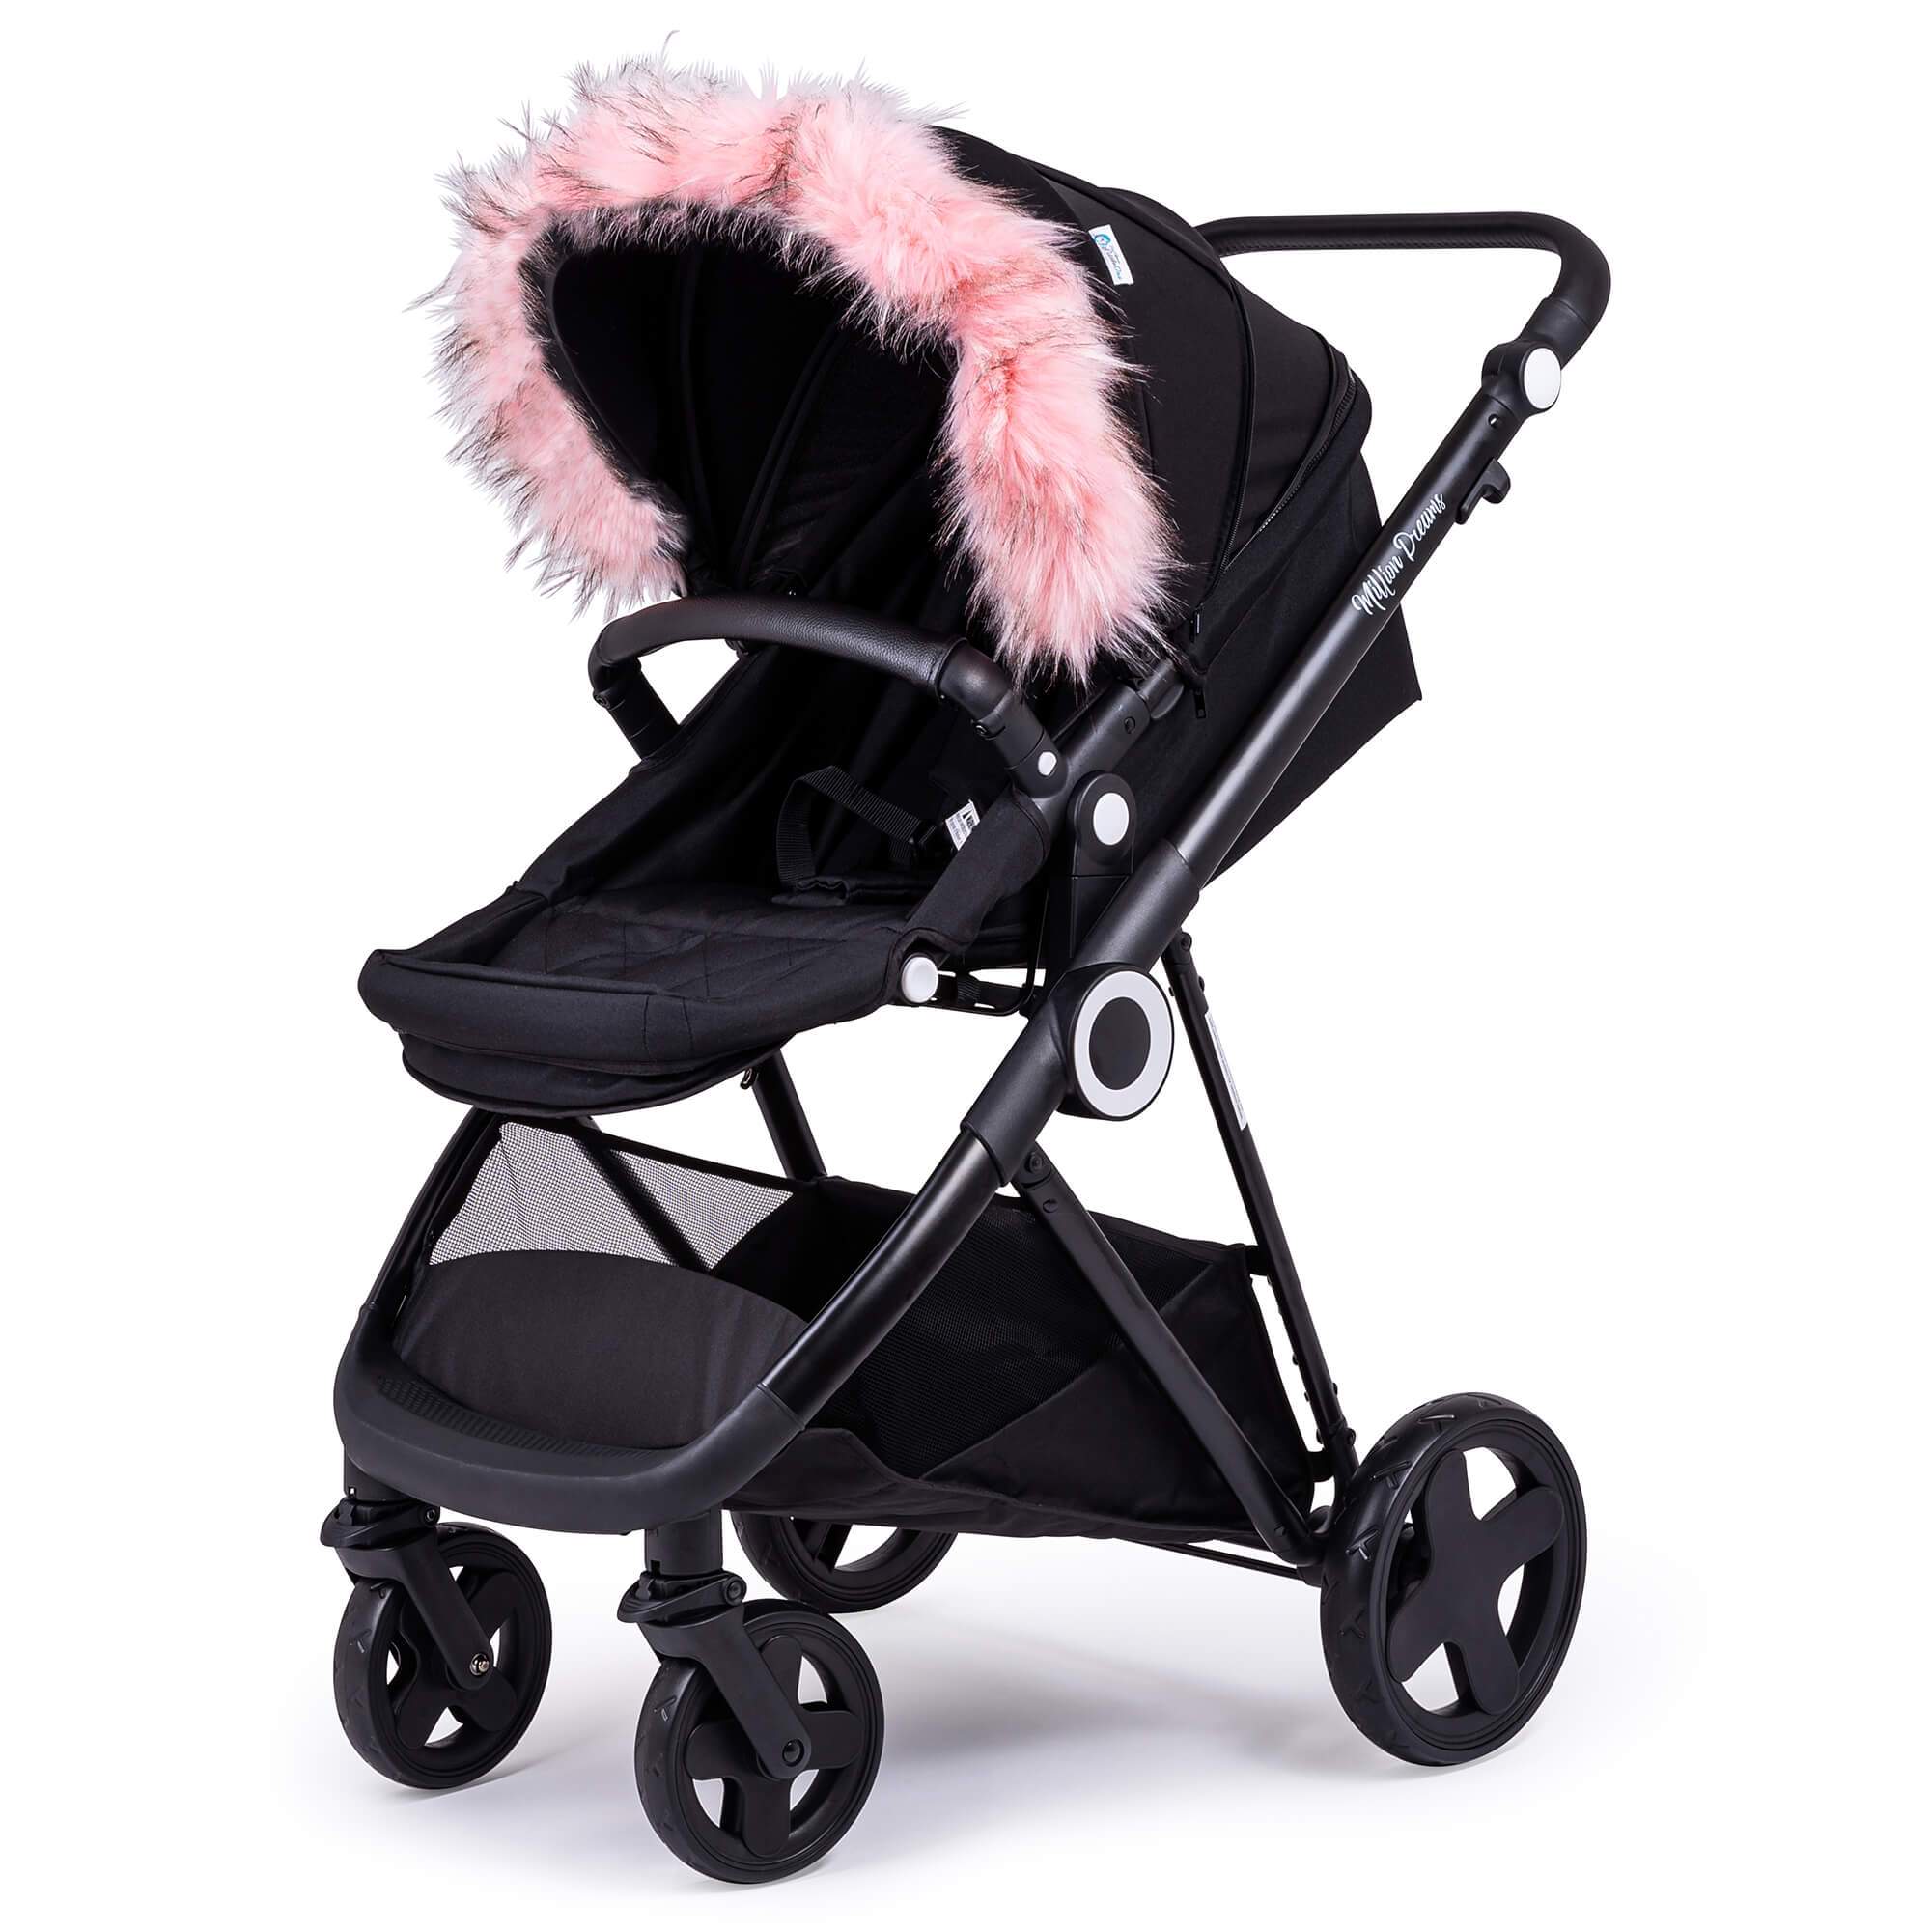 Pram Fur Hood Trim Attachment for Pushchair Compatible with Urban Detour - Light Pink / Fits All Models | For Your Little One